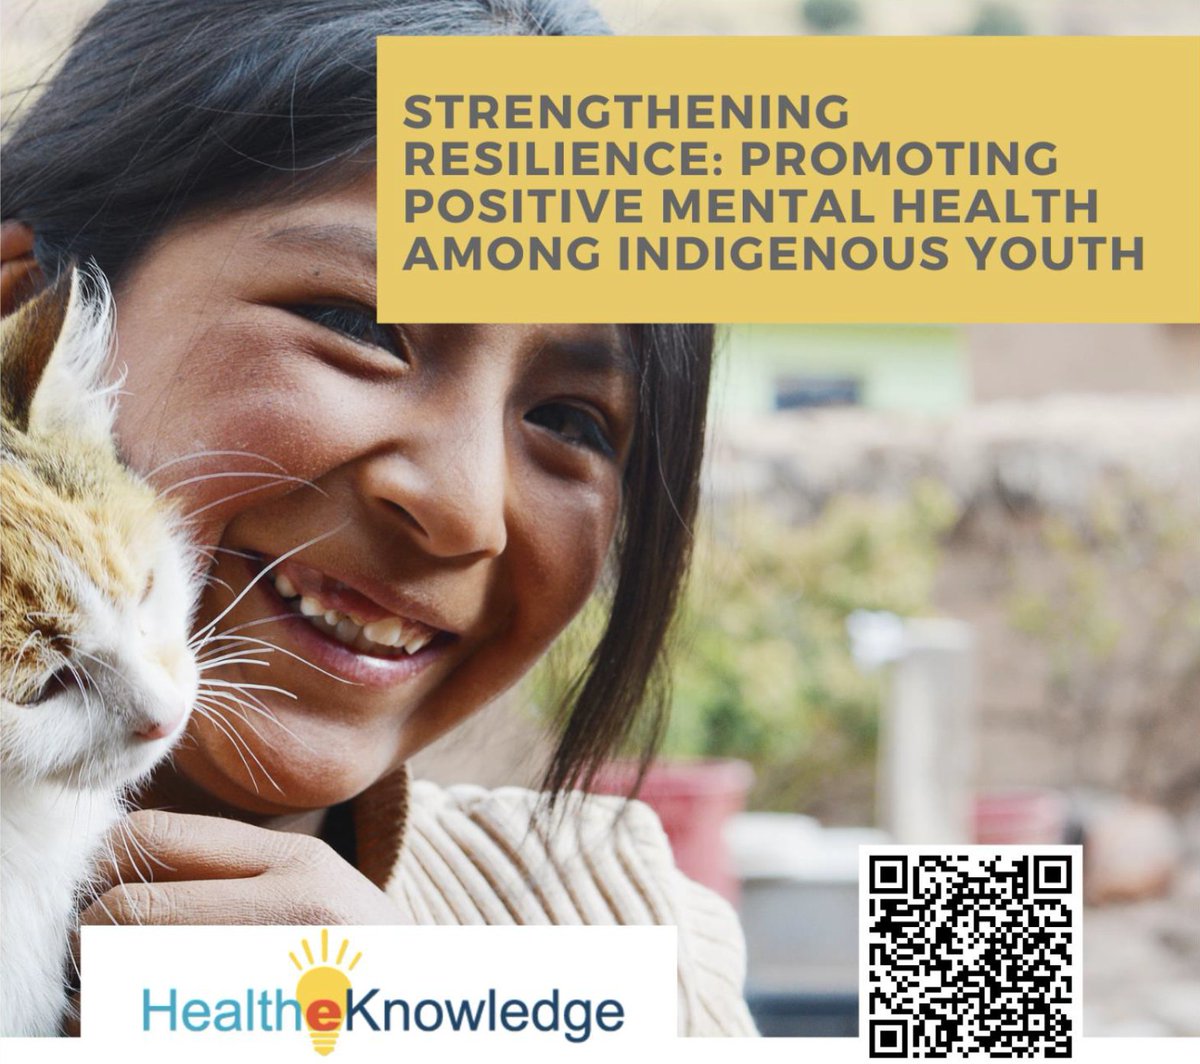 It's #MinorityHealthMonth and #WorkforceWednesday! Check out our free online course, Strengthening Resilience: Promoting Positive Mental Health Among Indigenous Youth. Learn strategies and develop skills to support a positive identity in #Indigenous youth! healtheknowledge.org/course/index.p…